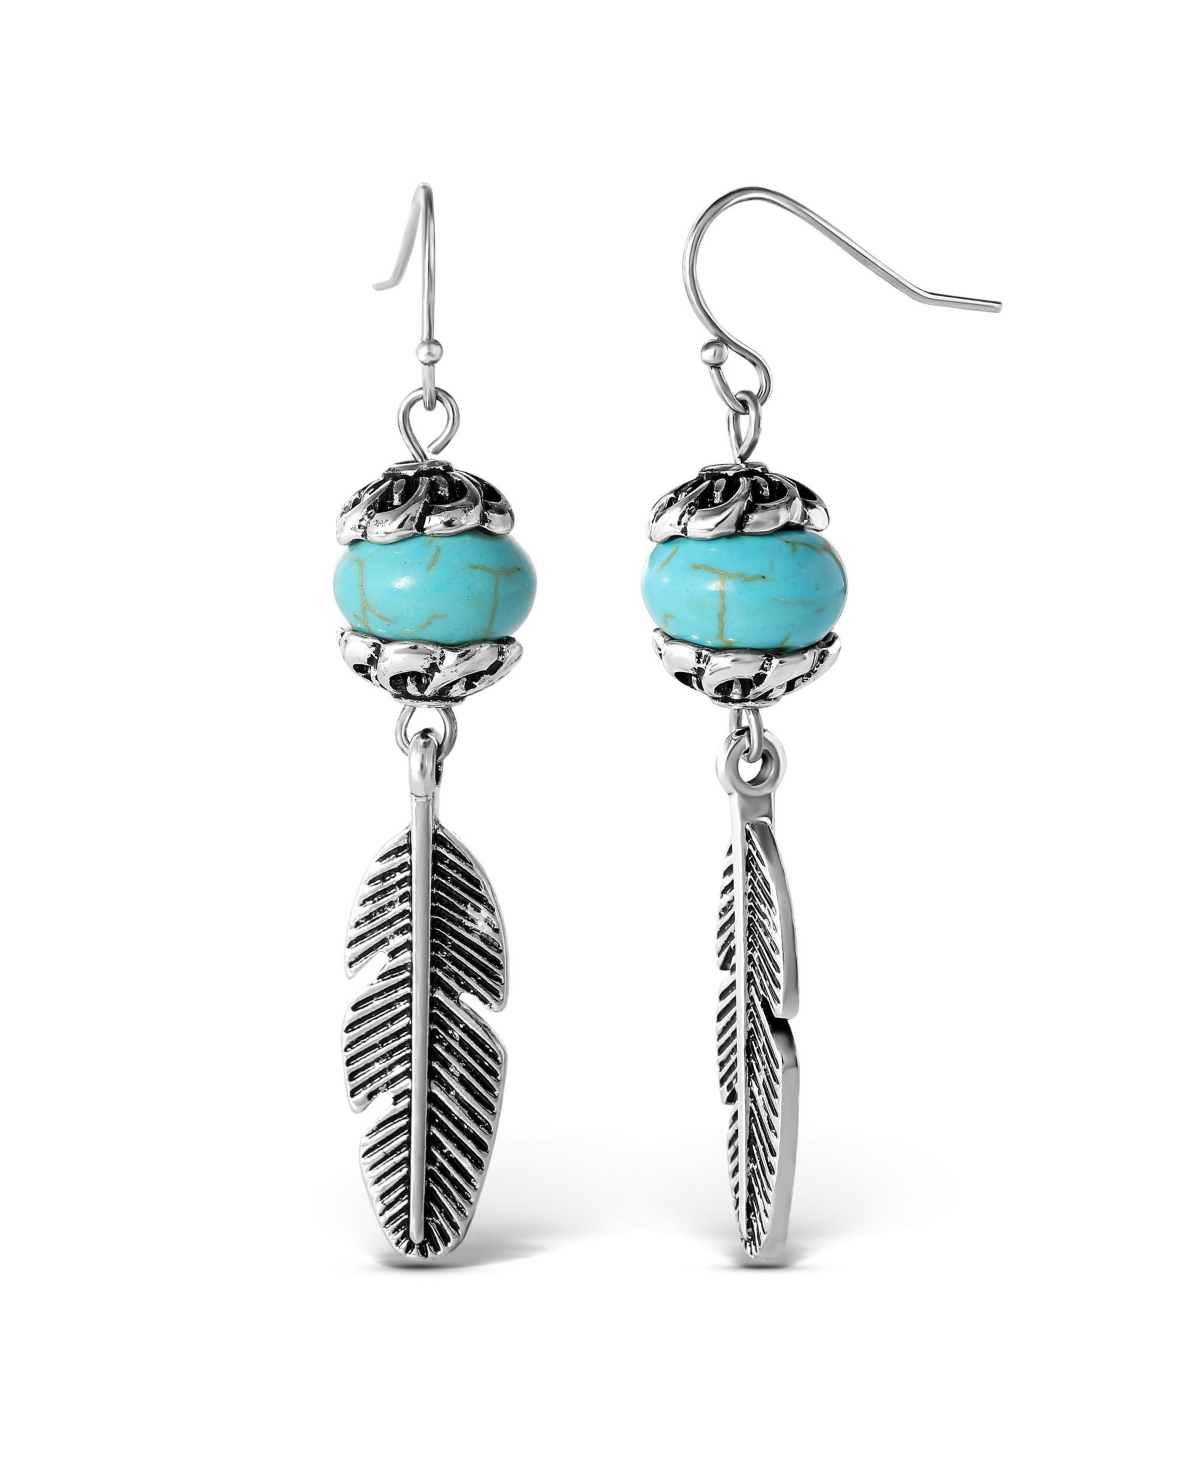 Womens Turquoise Bead Feather Drop Earrings - Oxidized Gold-Tone or Silver-Tone Turquoise Earrings - Silver